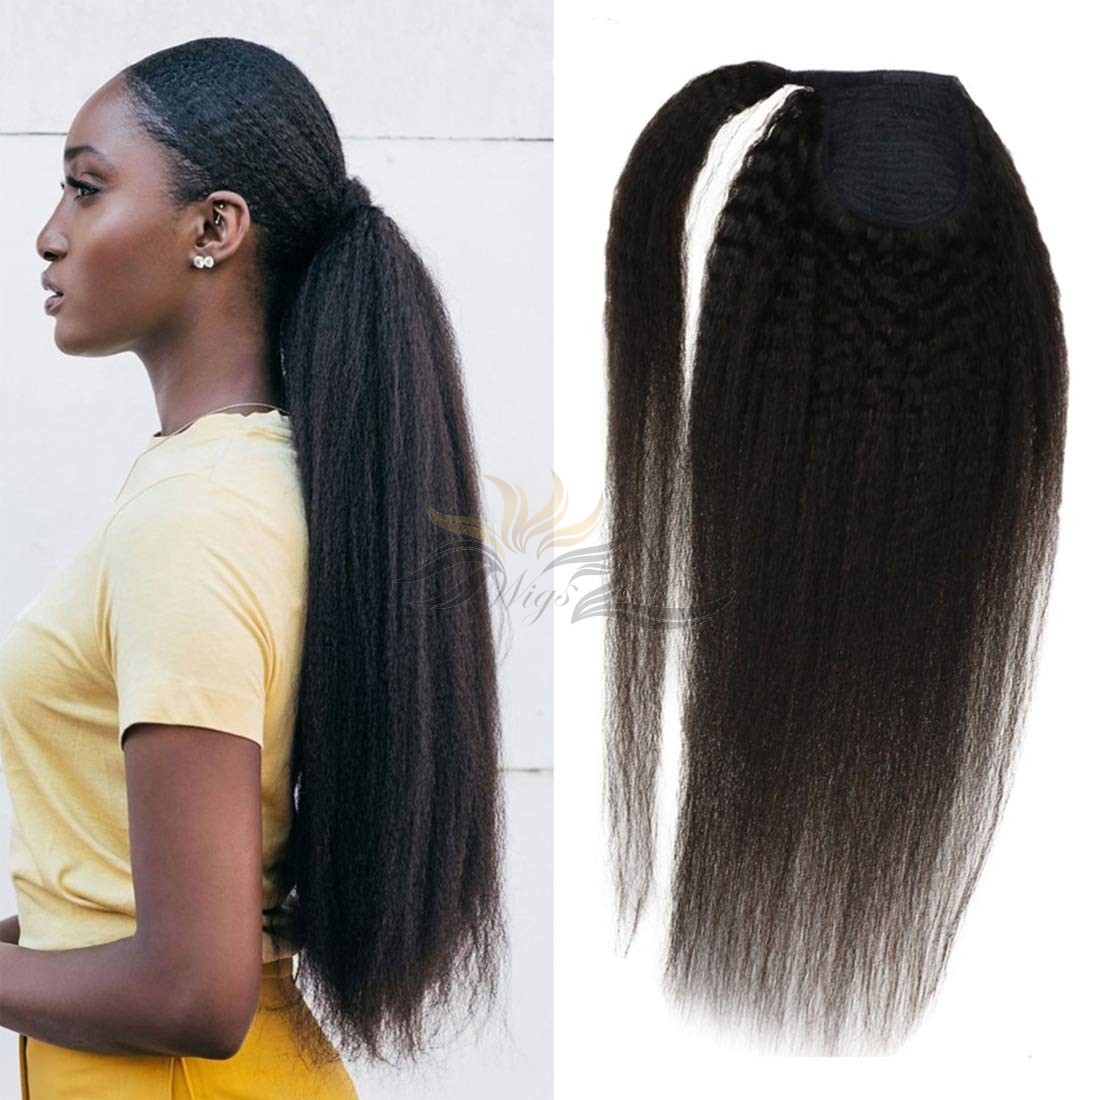 Clip in Ponytail Extension Wrap Around Kinky Straight Hairpiece for Black Women 22 Inch Kinky Straight Hair [HA09]